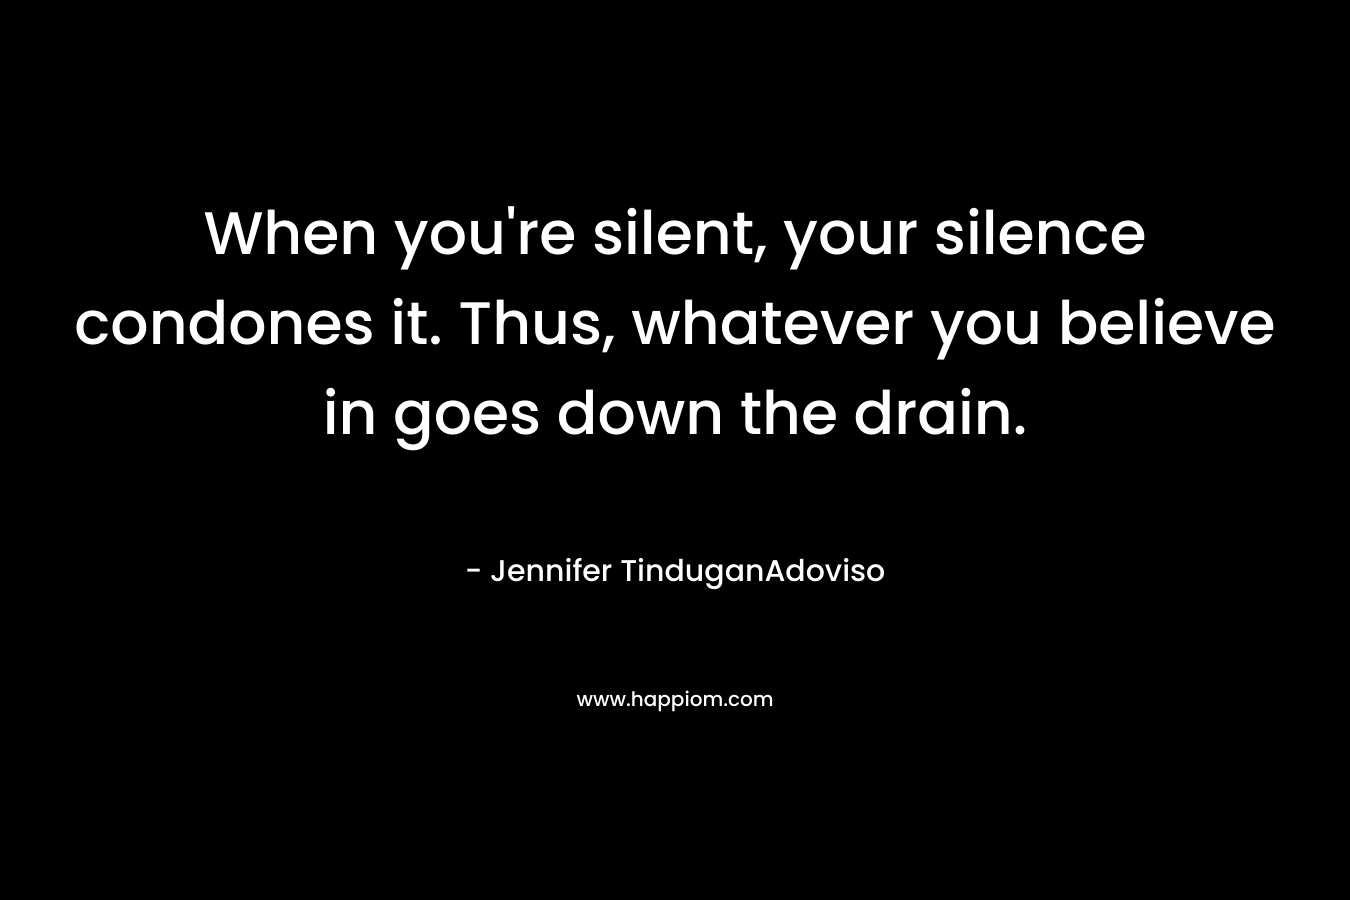 When you’re silent, your silence condones it. Thus, whatever you believe in goes down the drain. – Jennifer TinduganAdoviso